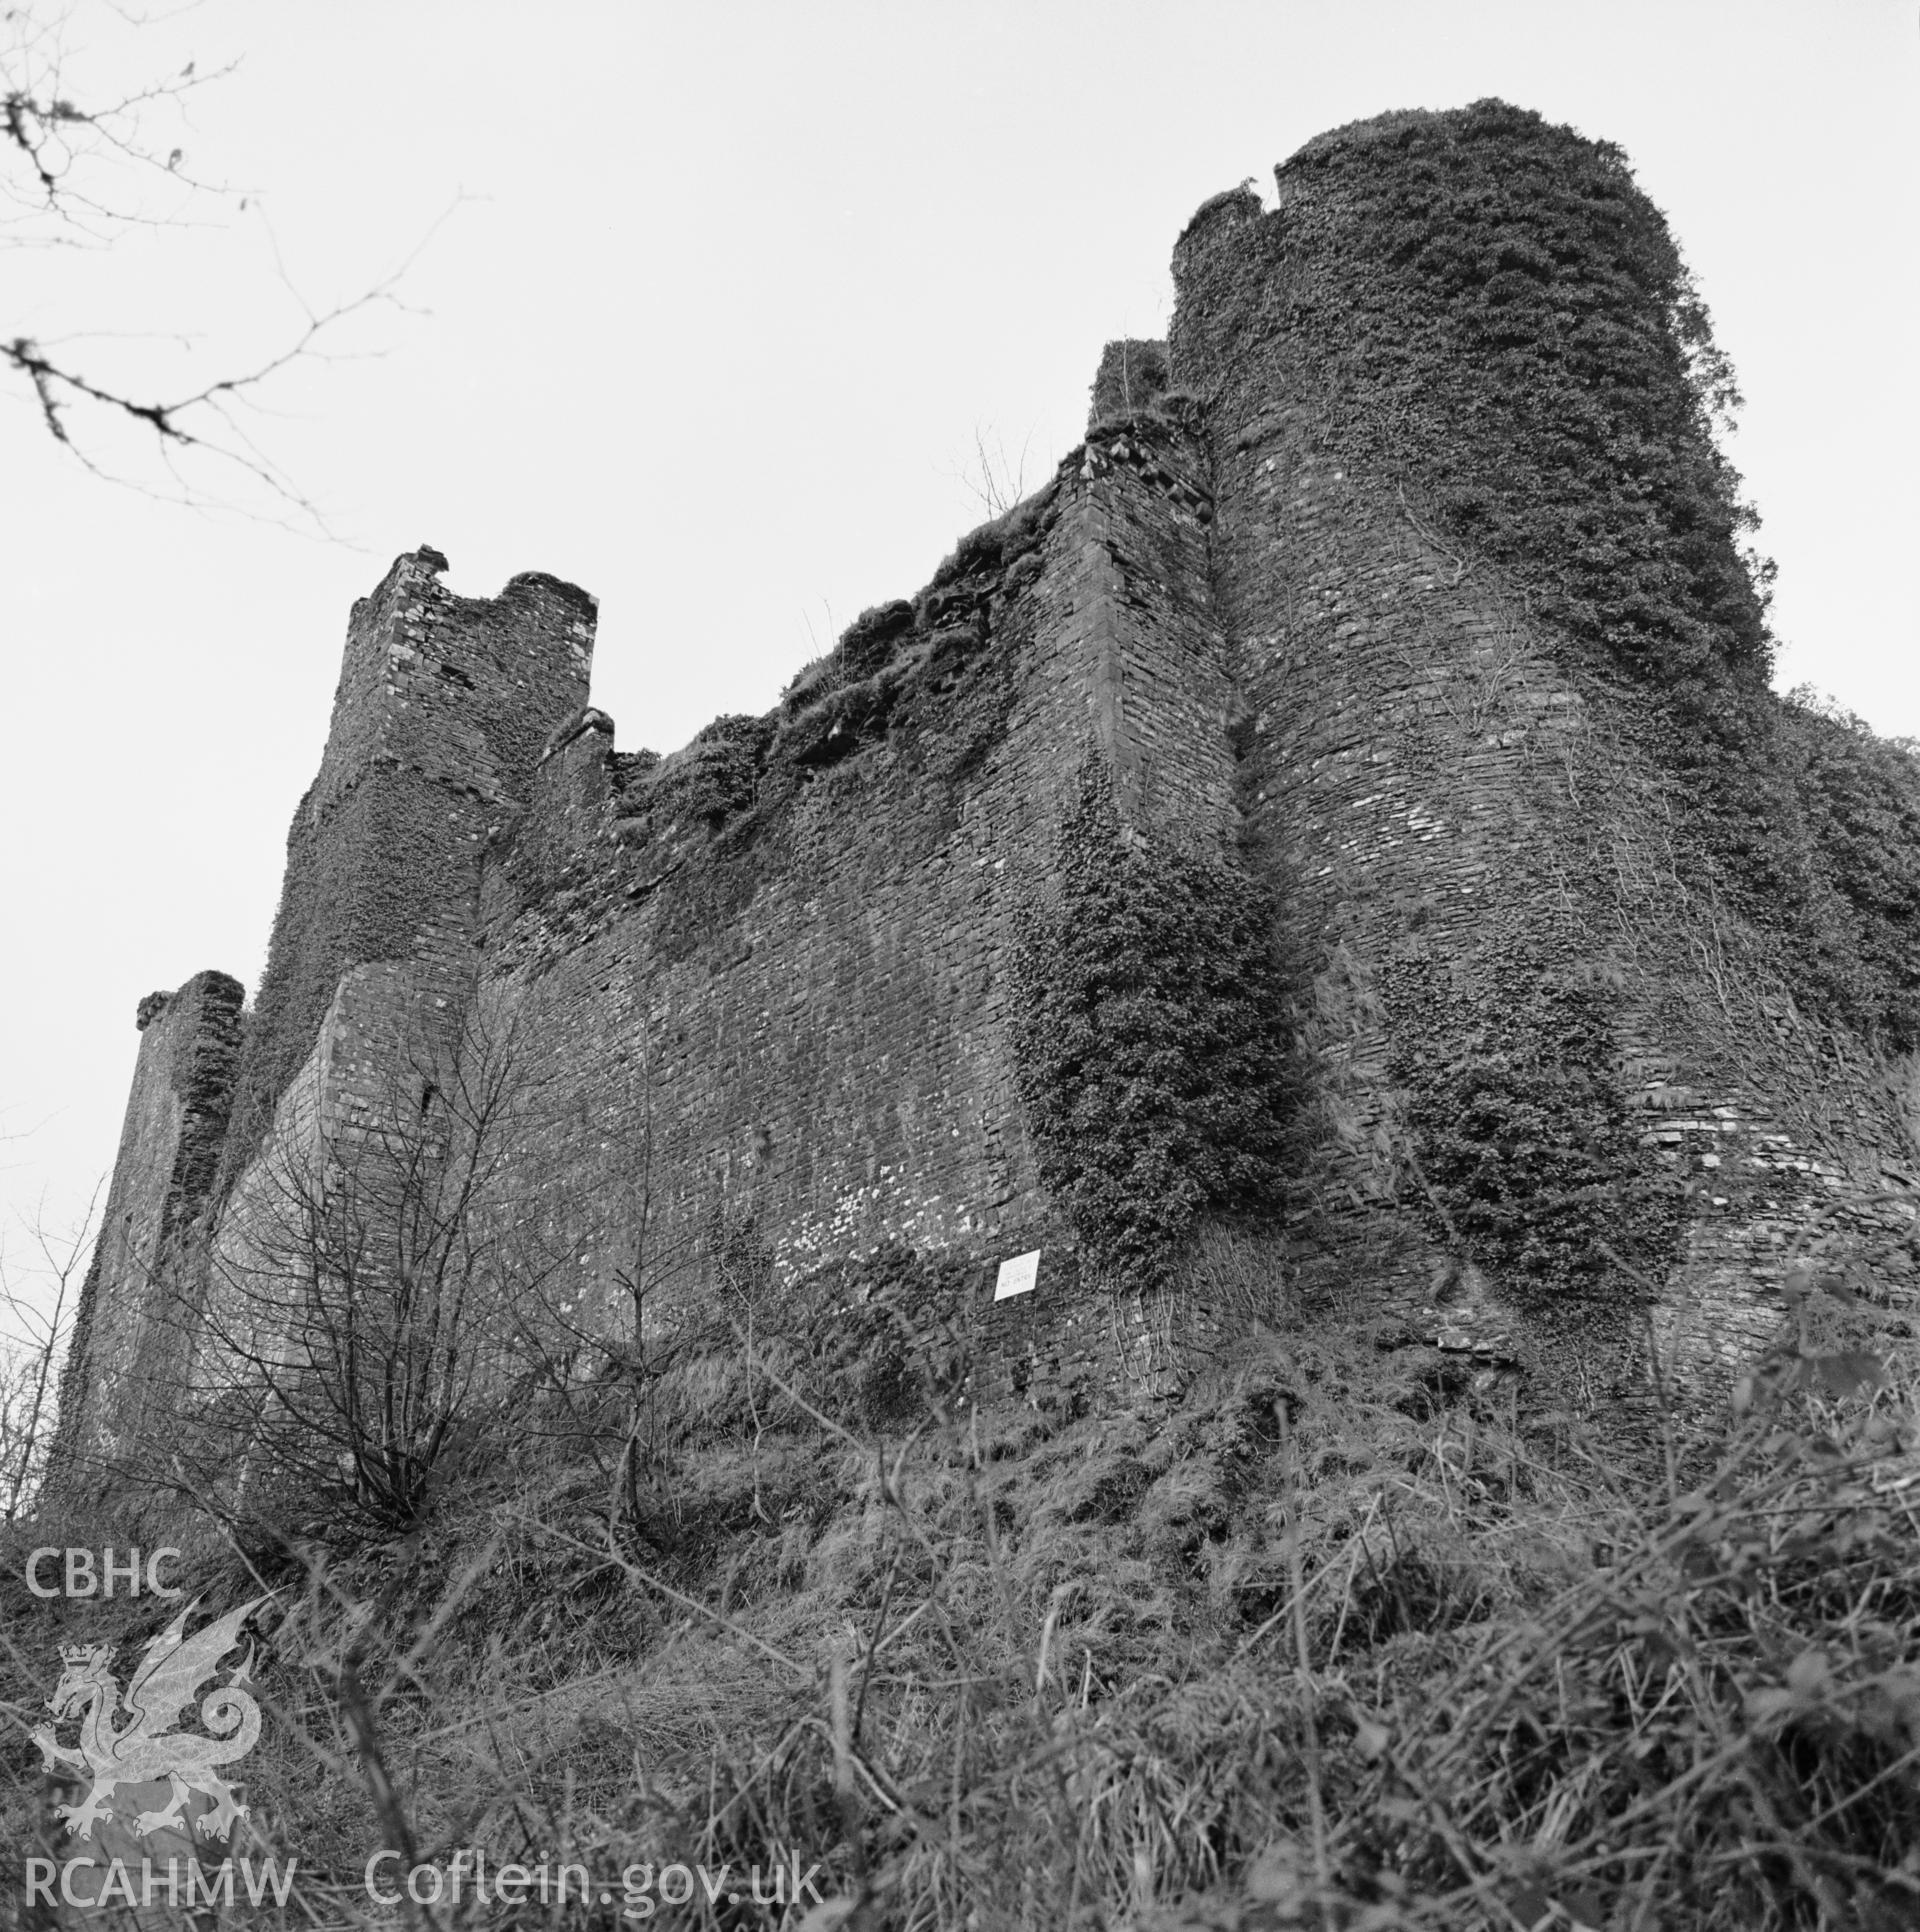 Photographic negative showing view of Dinefwr Castle; collated by the former Central Office of Information.